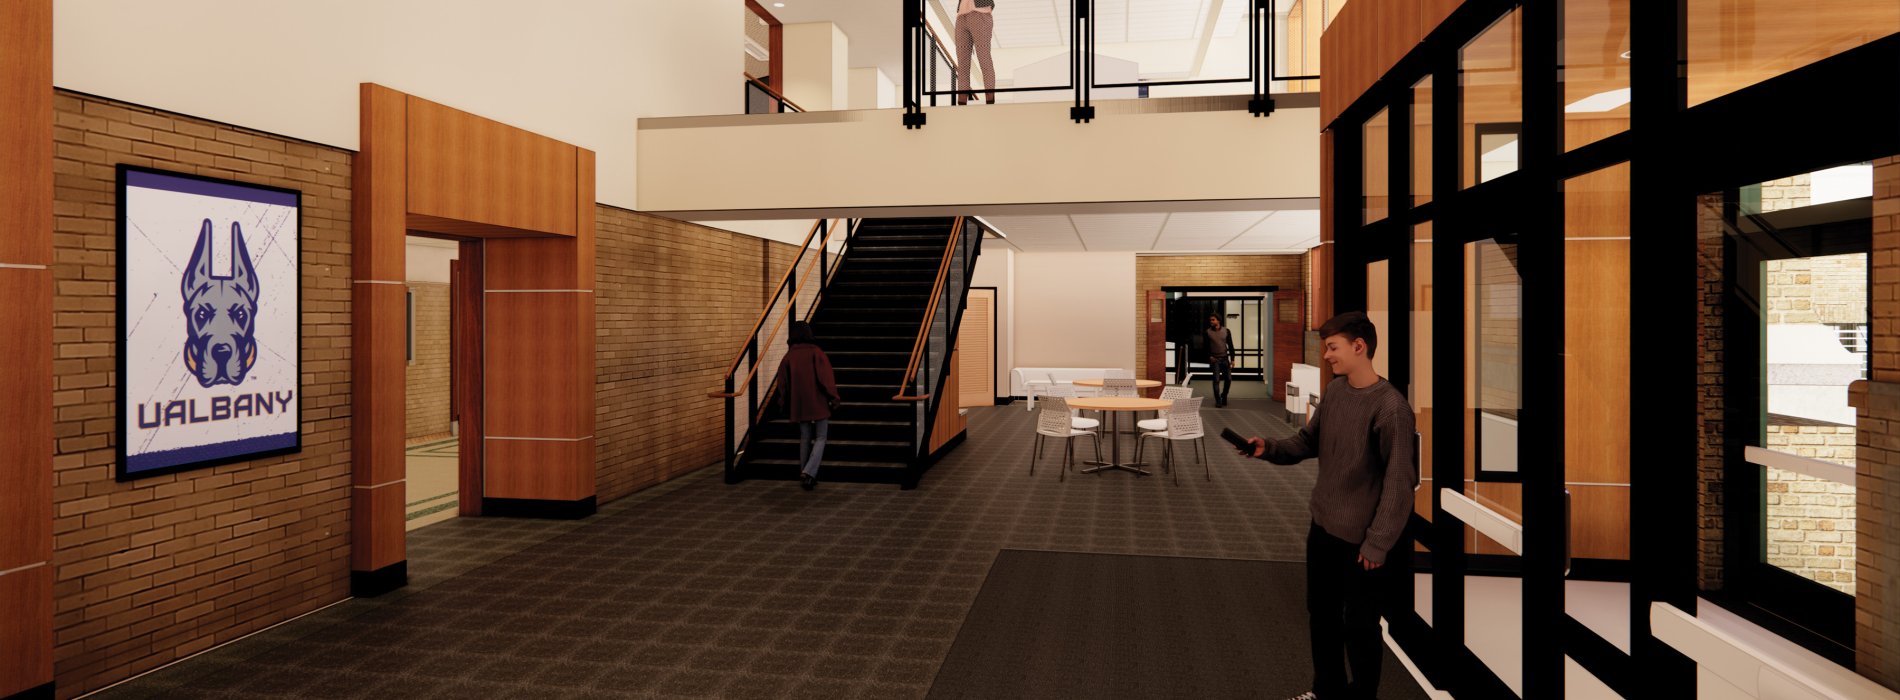 Rendering of the lobby of the College of Engineering and Applied Sciences building at UAlbany.